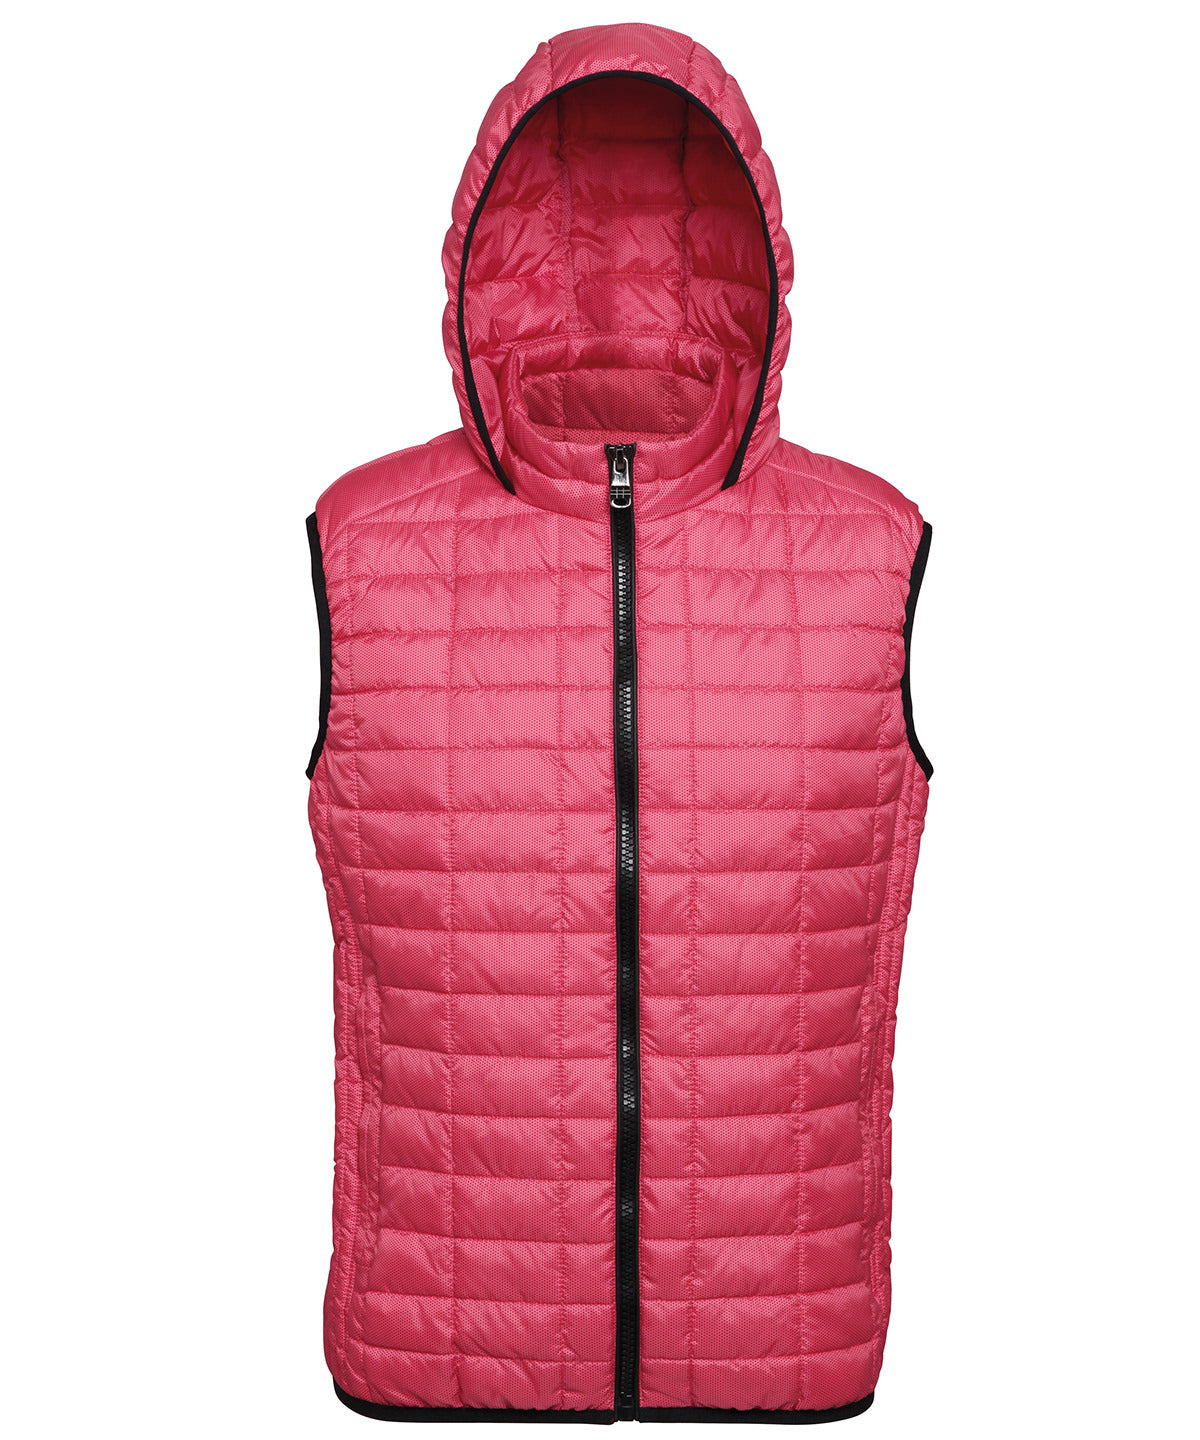 Honeycomb hooded gilet | Red